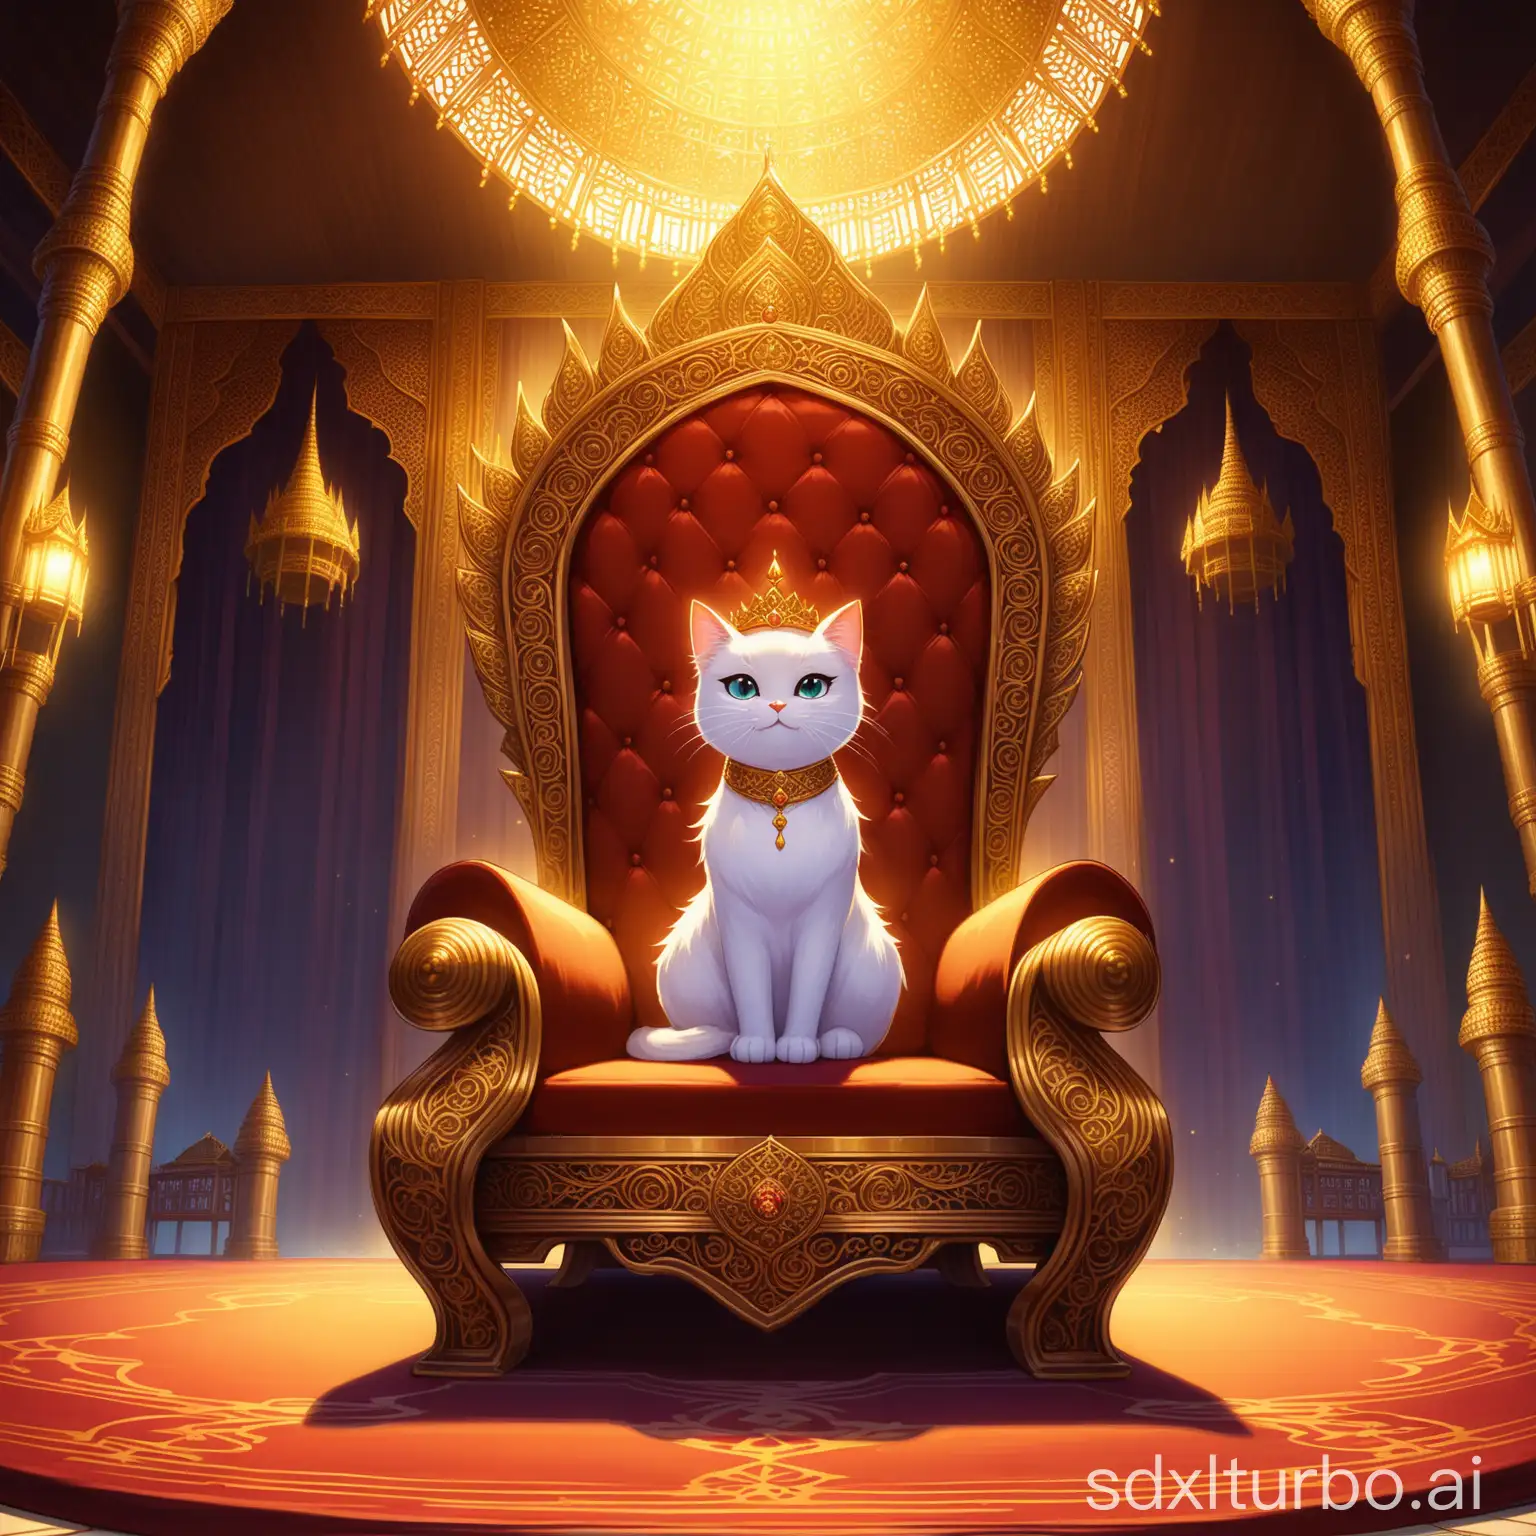 Siam-Cat-Princess-Throne-in-Palace-at-Dusk-High-Detail-Ultra-HD-Image